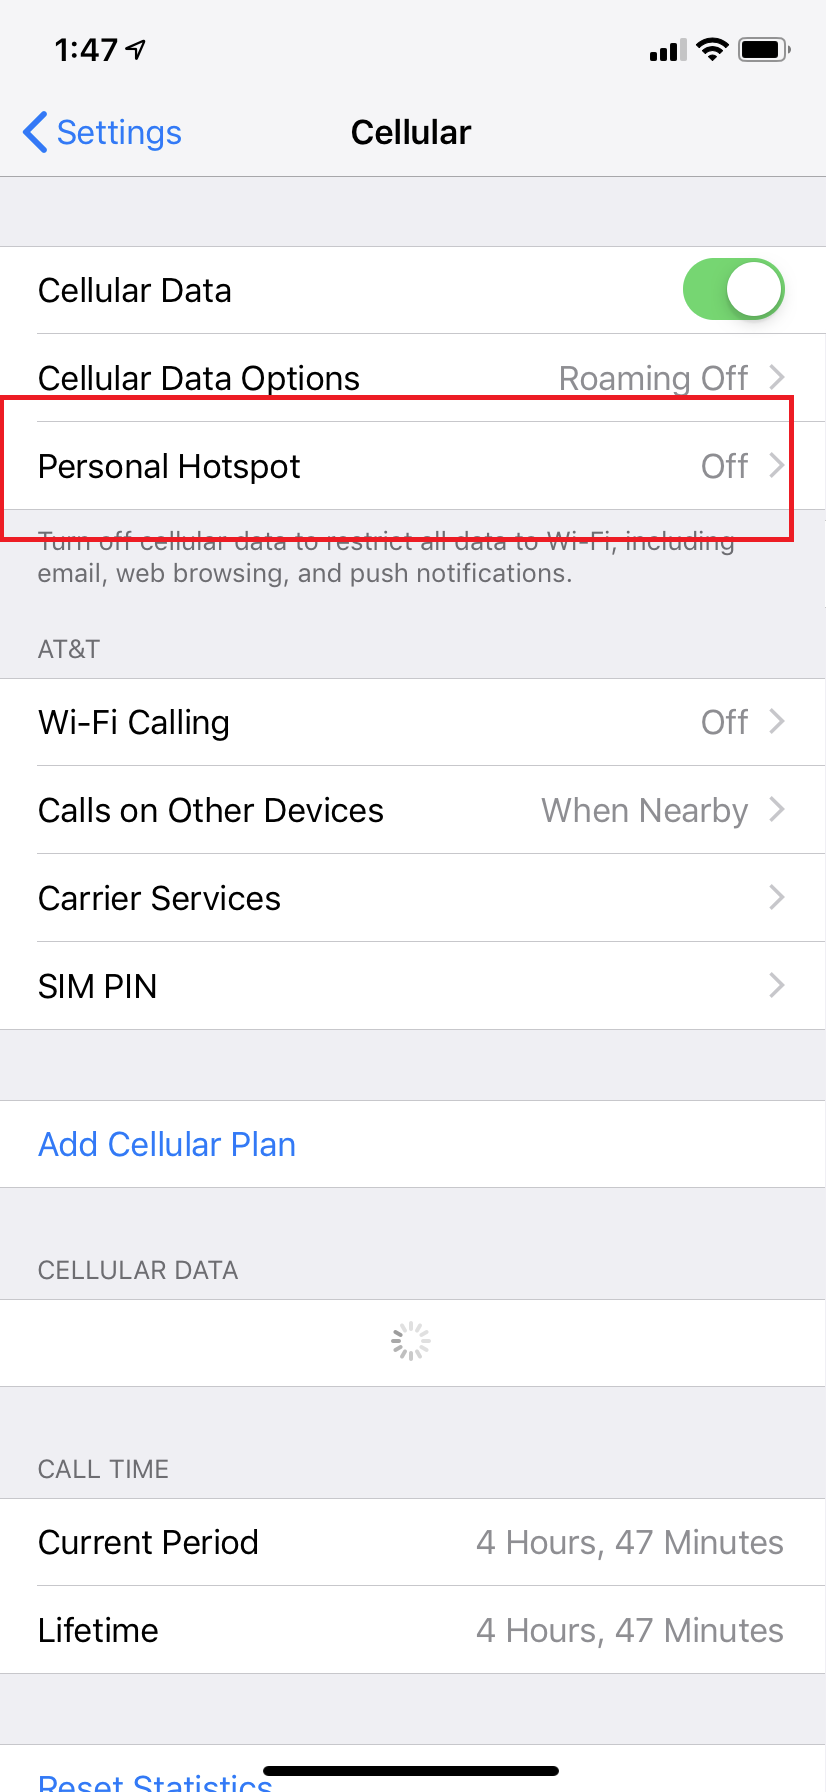 iOS settings showing where to change settings for Personal Hotspot